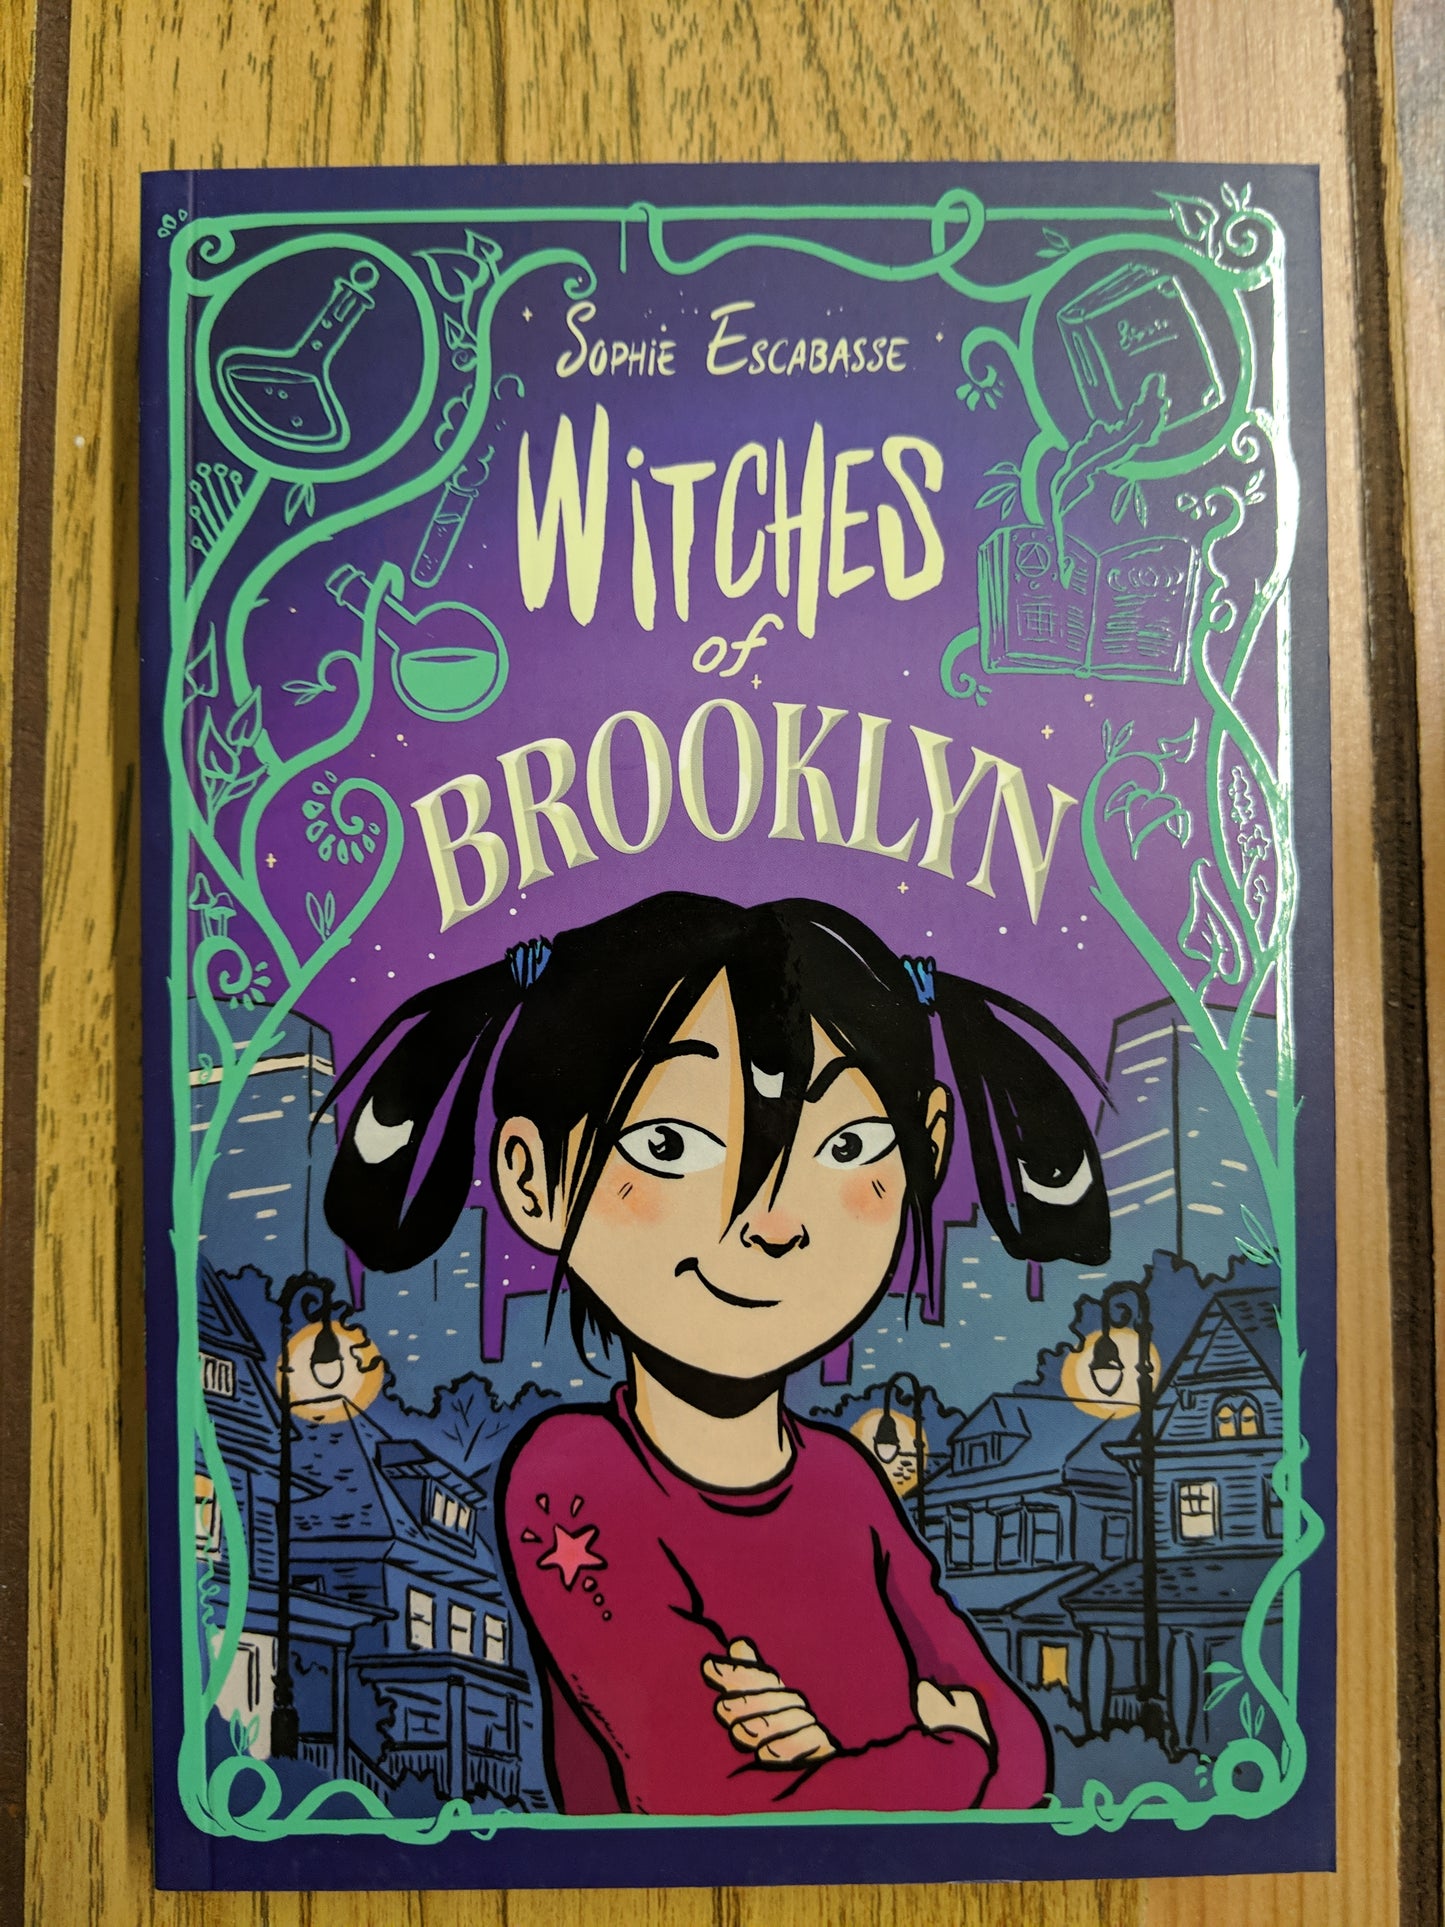 Witches of Brooklyn (#1)